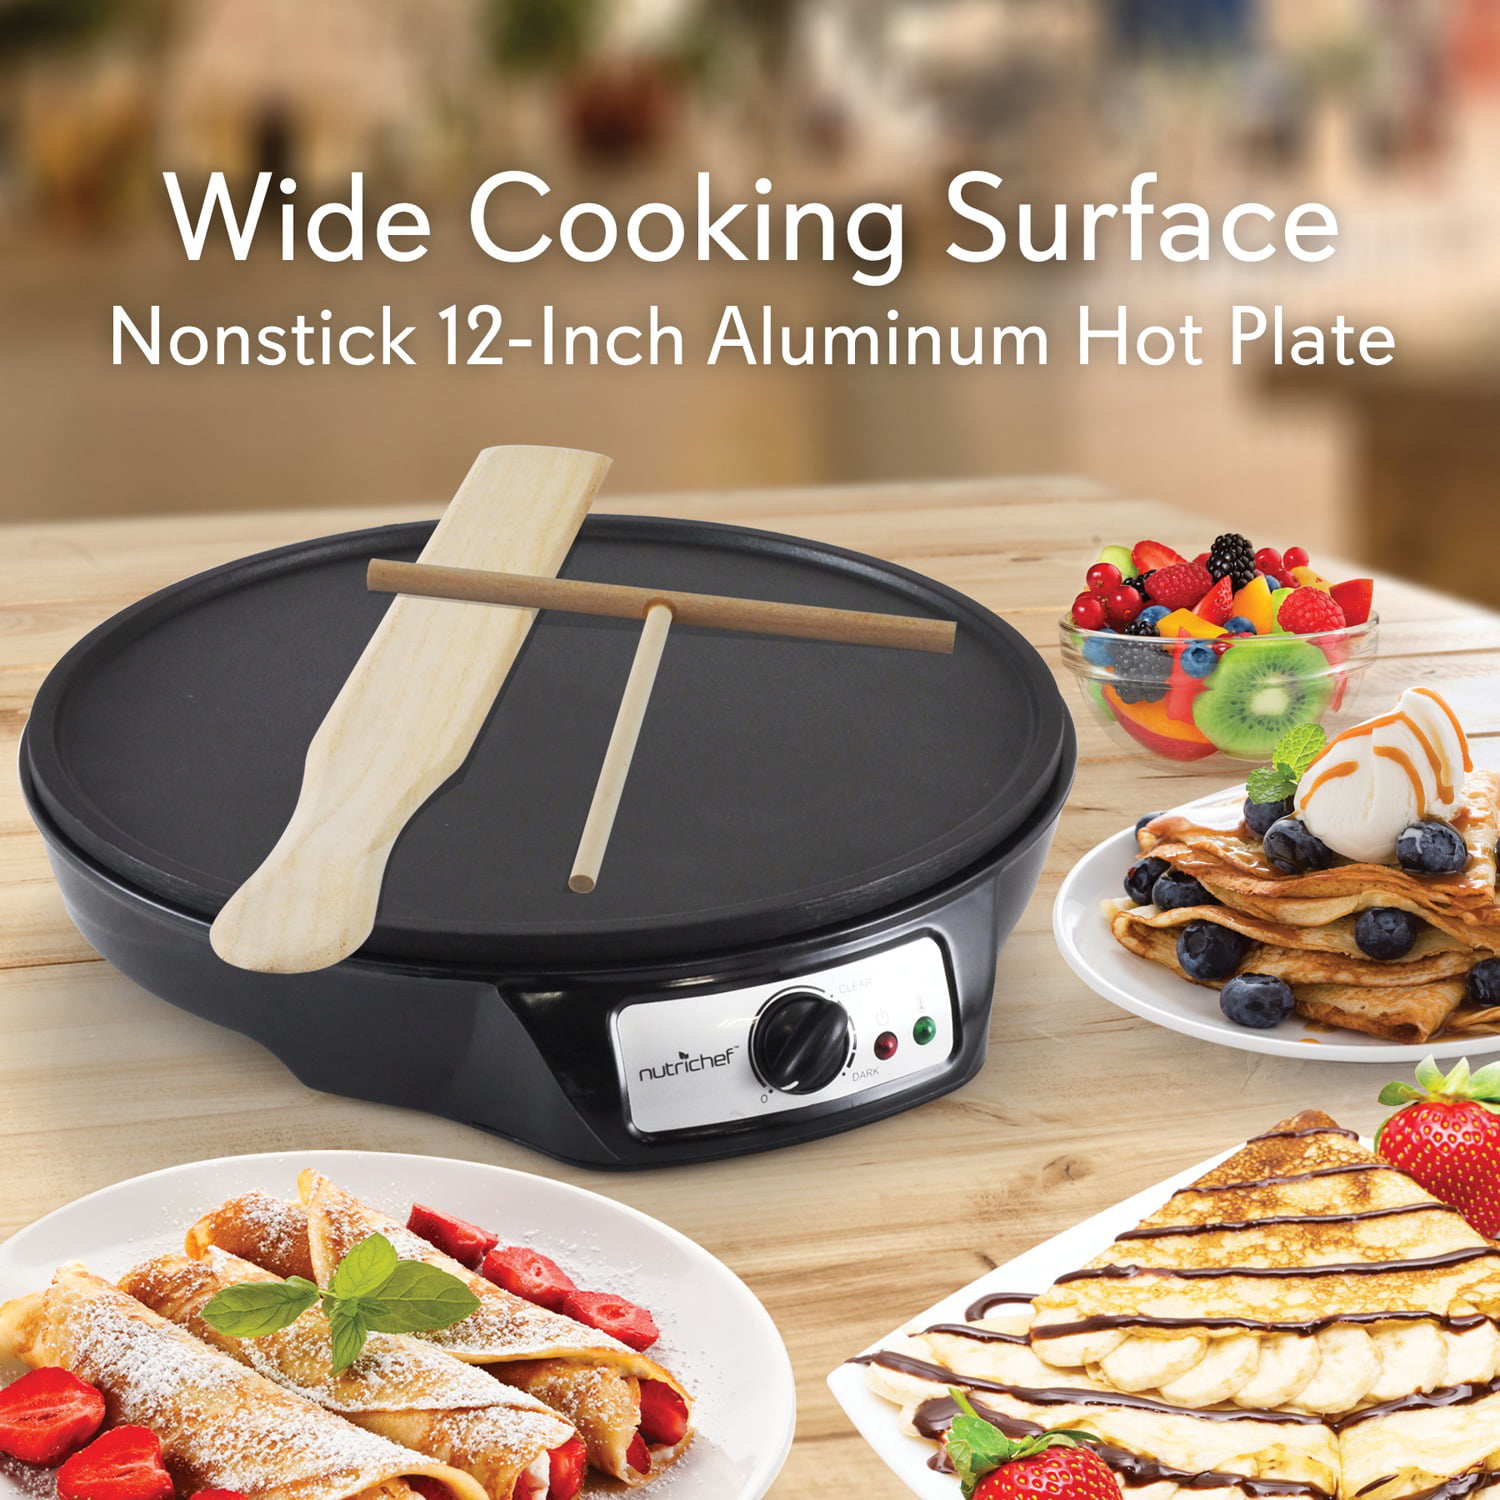 NEW ELECTRIC 700W OMELETTE MAKER/WAFFLE MAKER/PANCAKE CREPE  NON STICK 